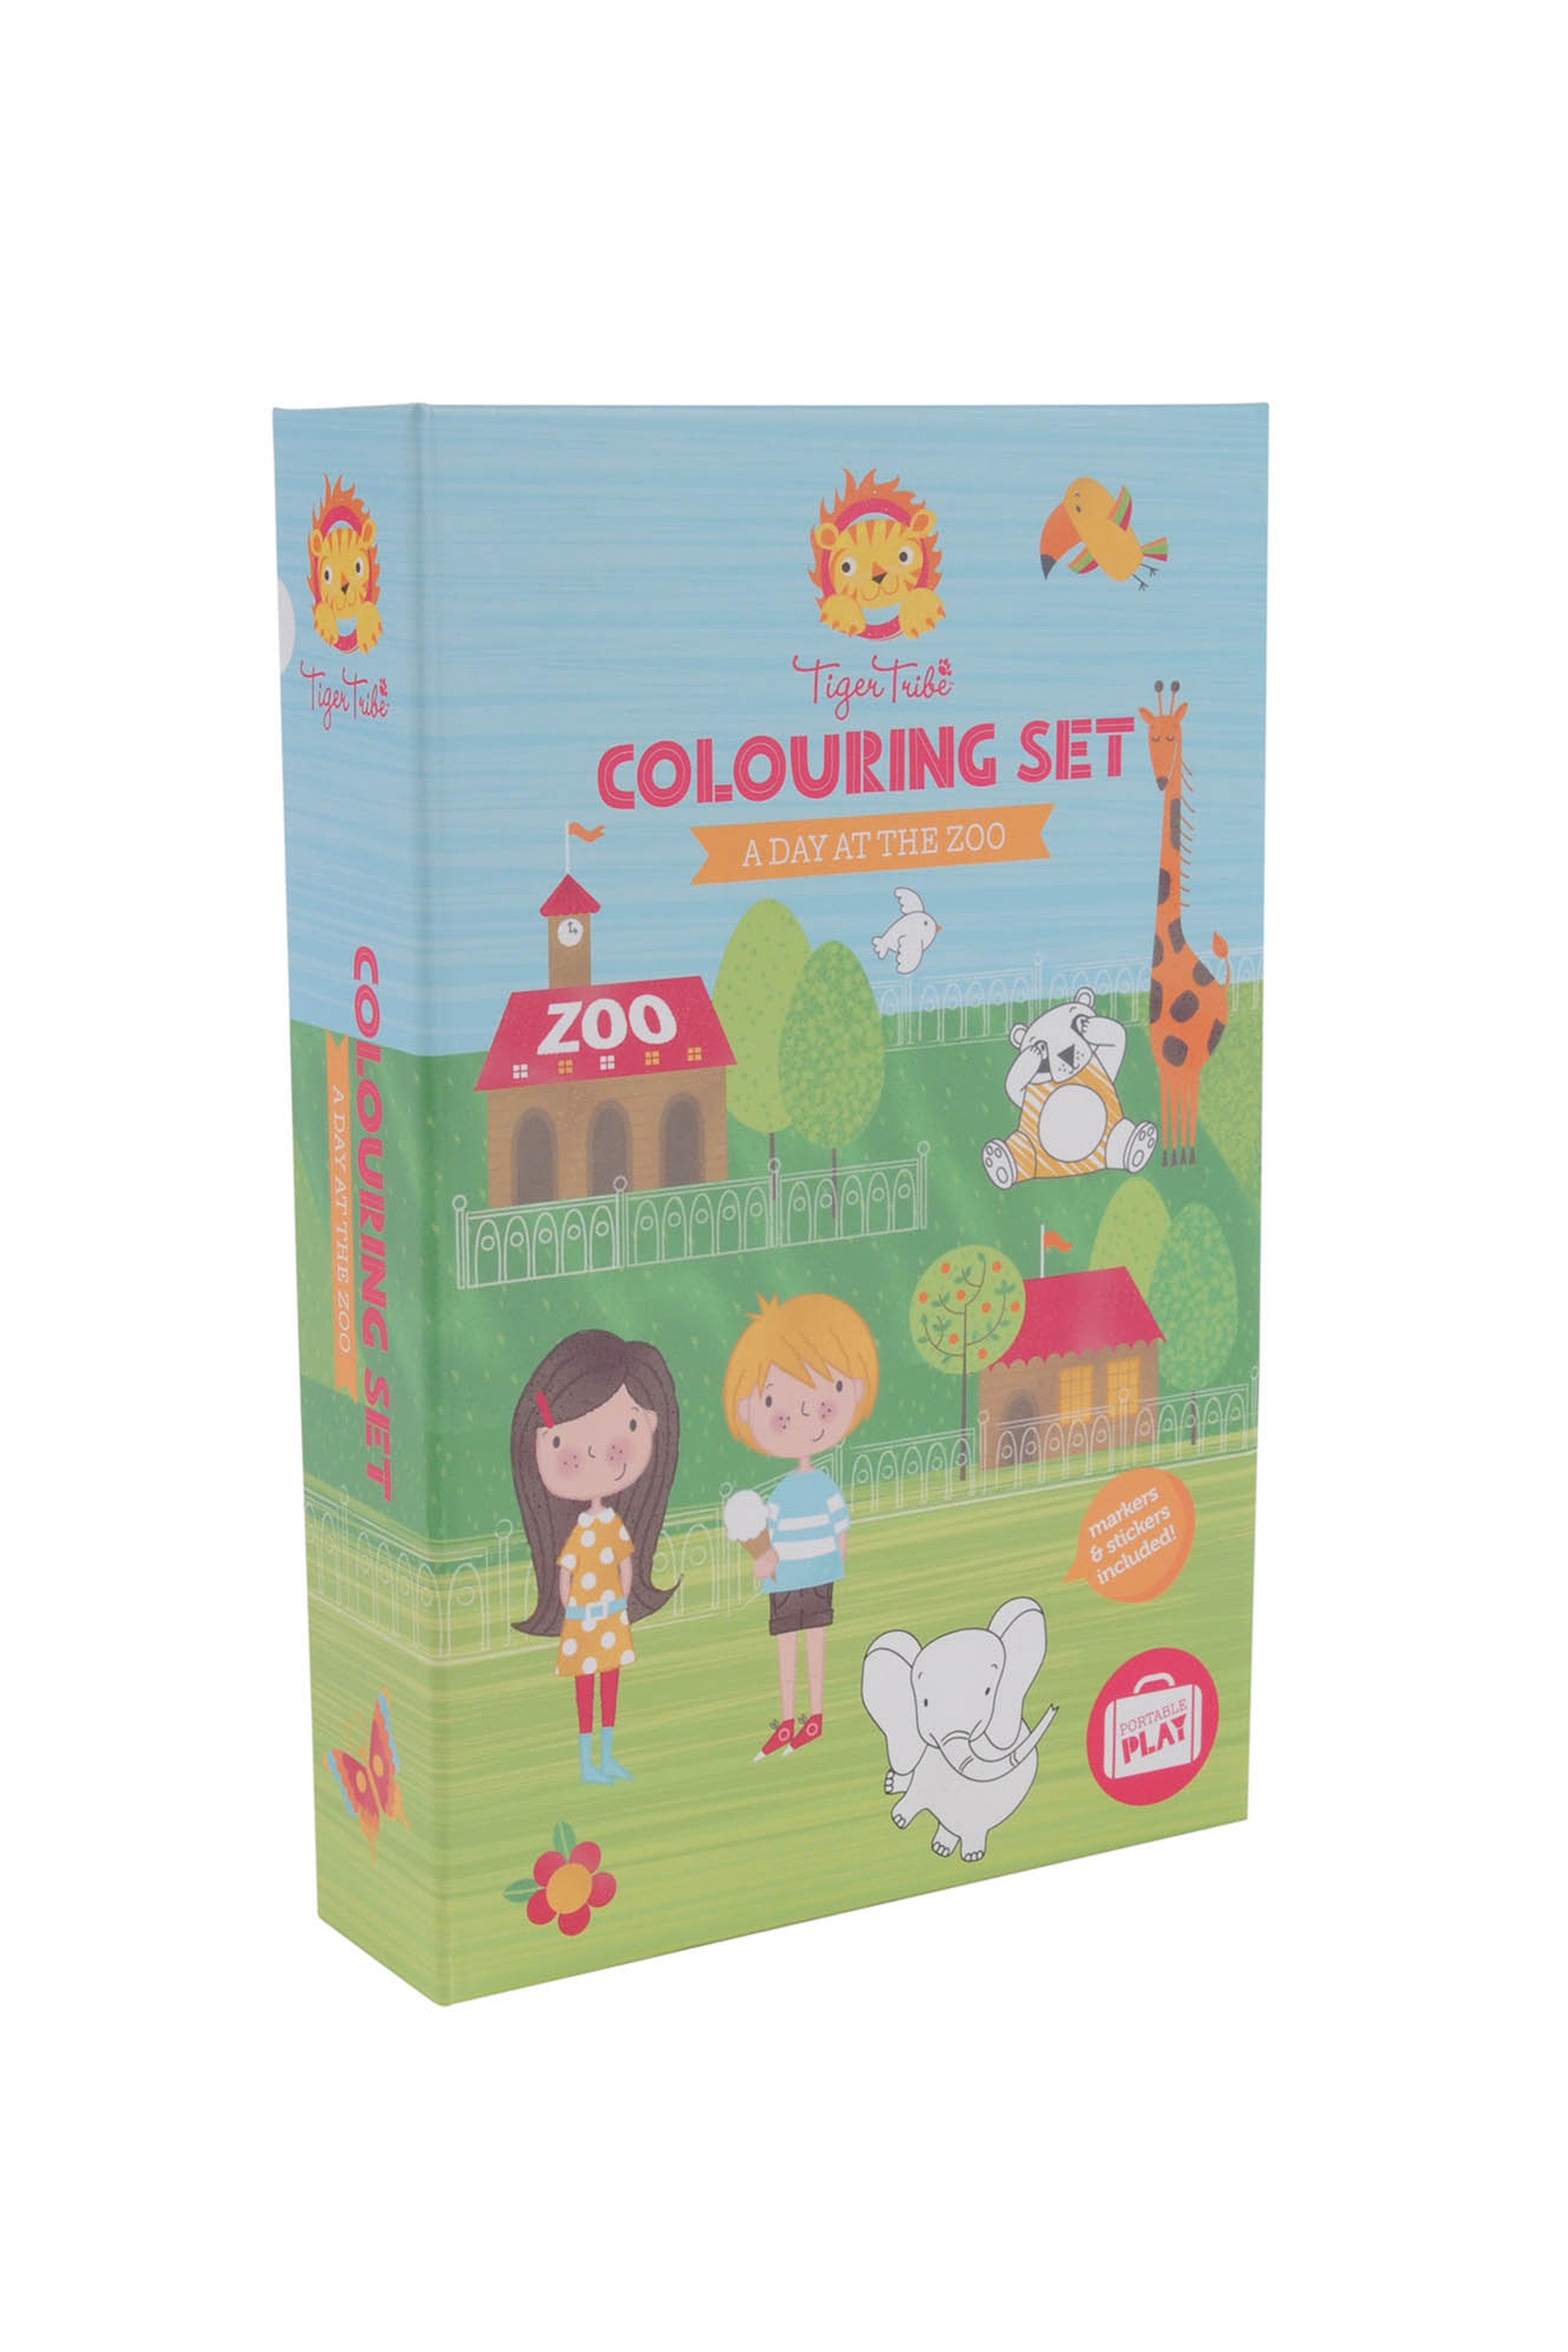 Colouring set - a day at the zoo